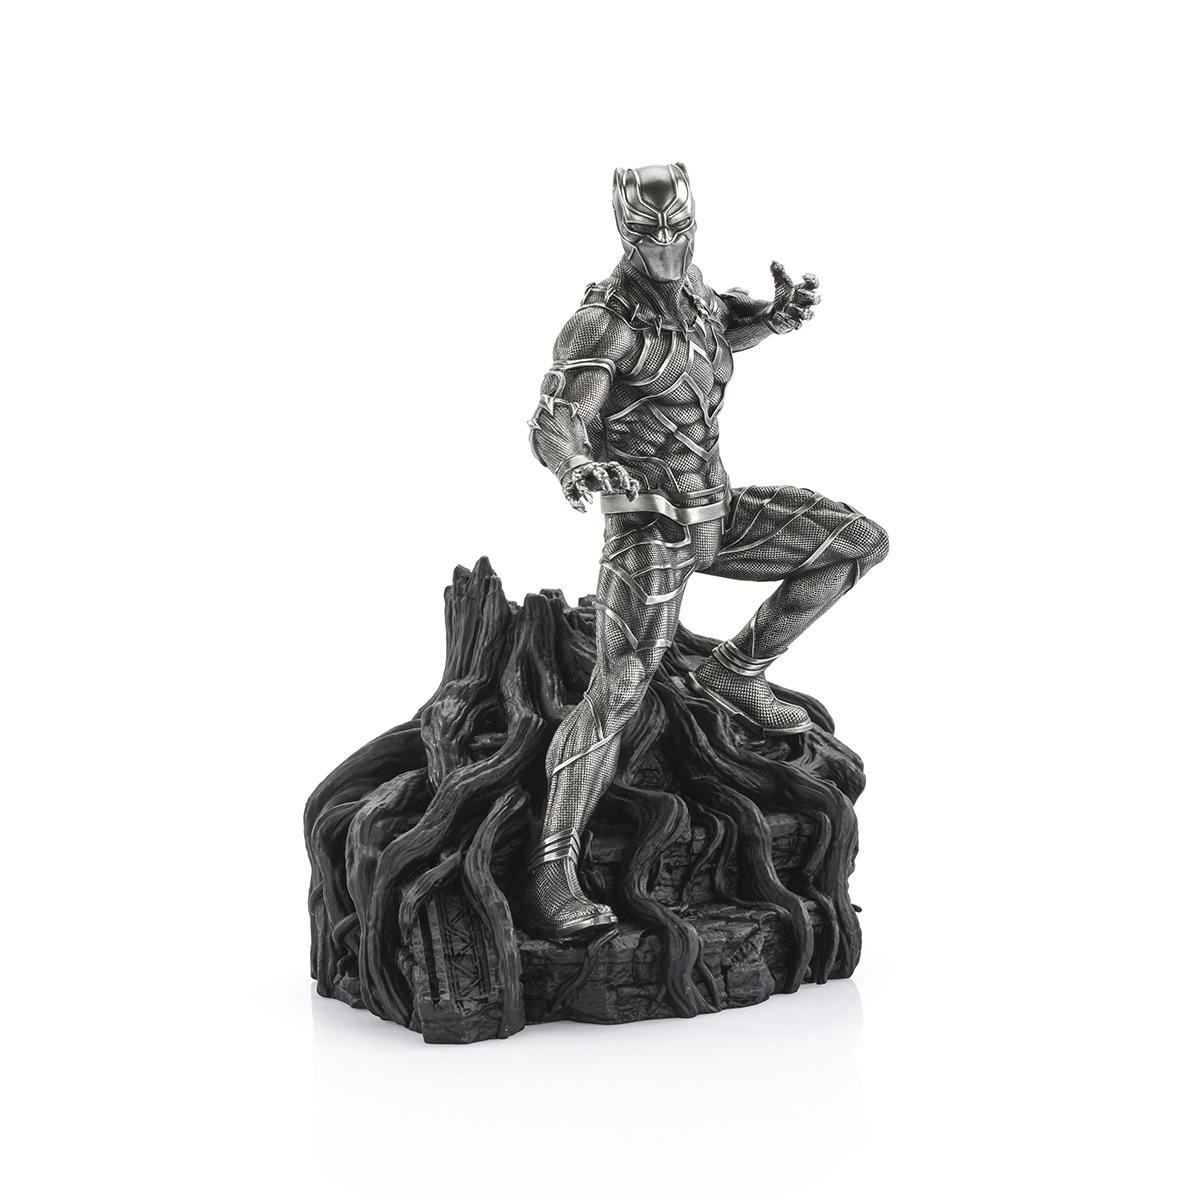 Limited Edition Black Panther Guardian Figurine